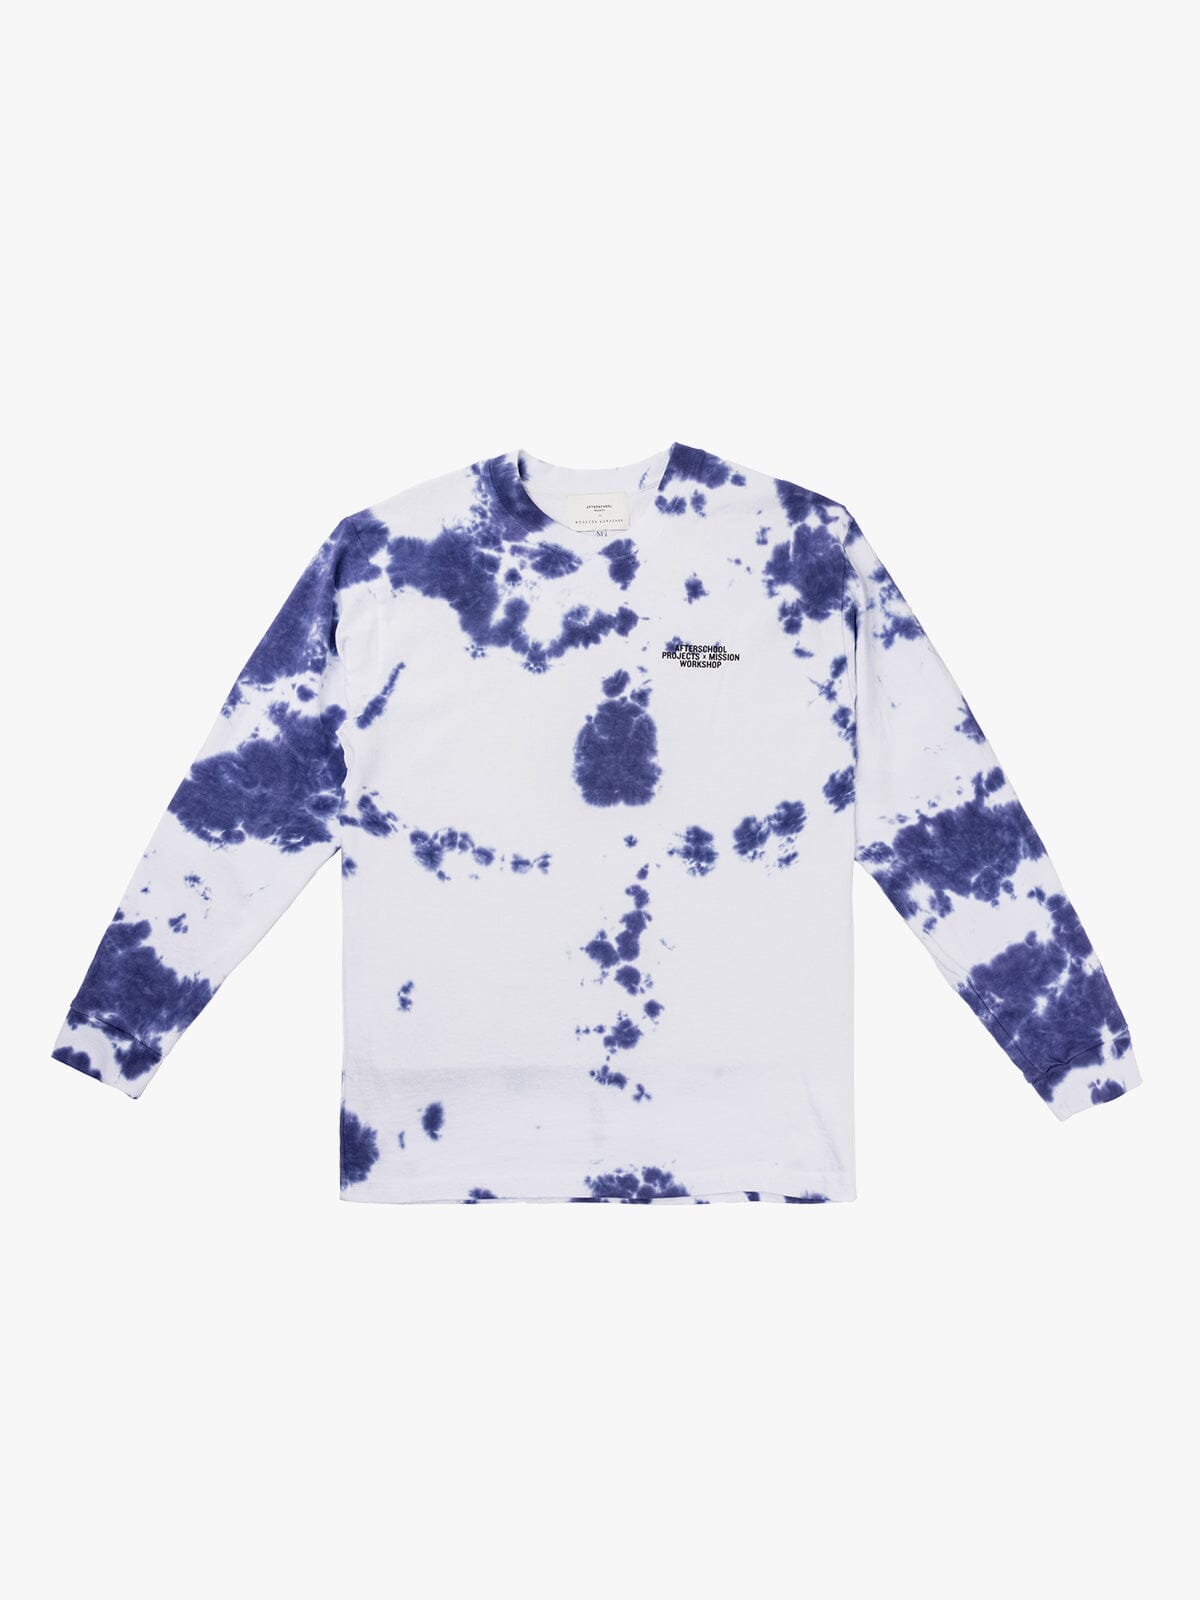 MW x ASP Long Sleeve Hand Dyed Tee by Mission Workshop - Weatherproof Bags & Technical Apparel - San Francisco & Los Angeles - Built to endure - Guaranteed forever